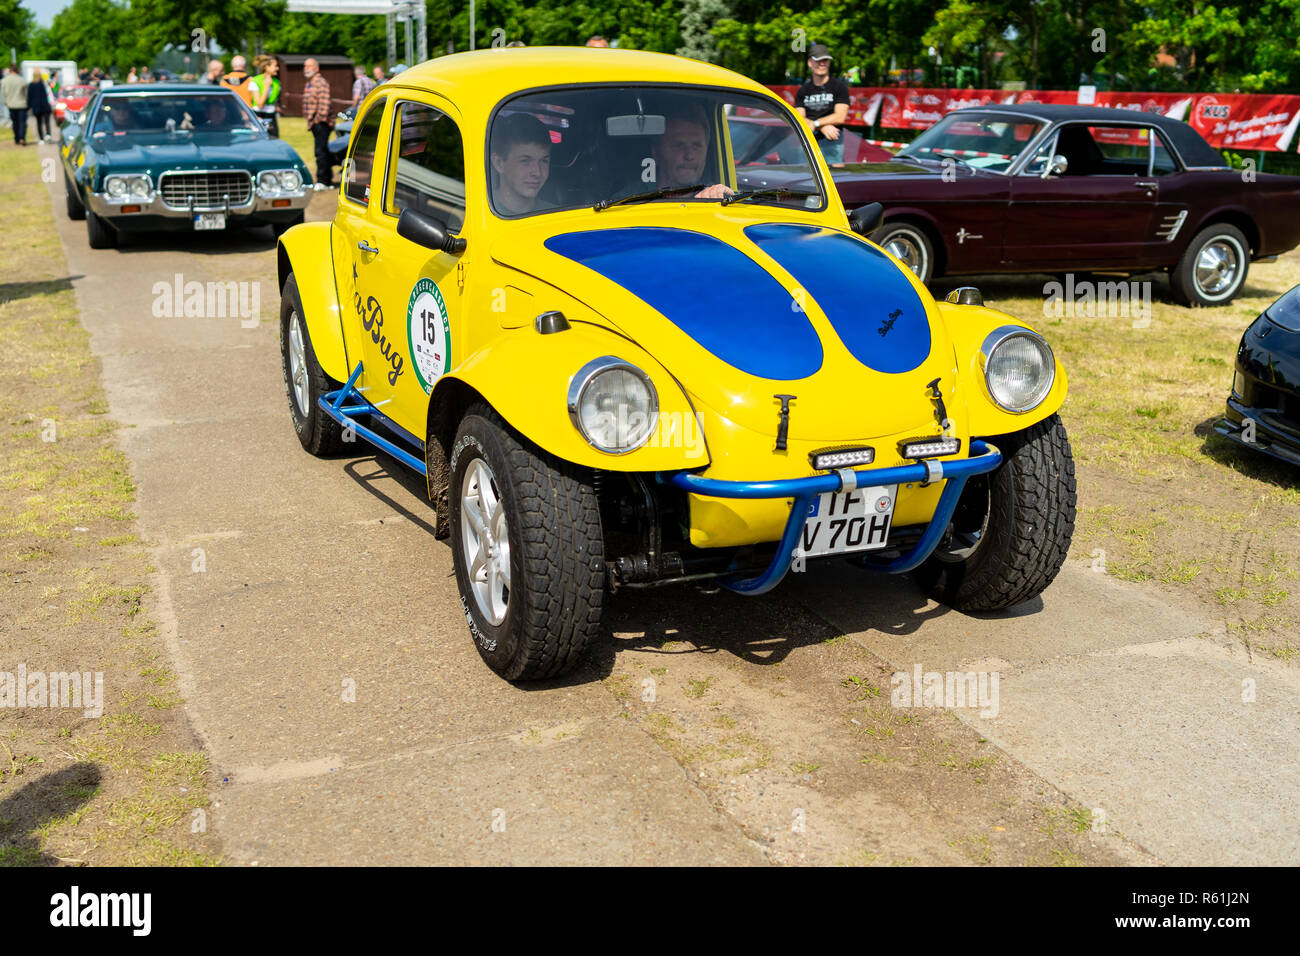 PAAREN IM GLIEN, GERMANY - MAY 19, 2018: A Baja Bug is an original Volkswagen Beetle modified to operate off-road. Exhibition 'Die Oldtimer Show 2018' Stock Photo